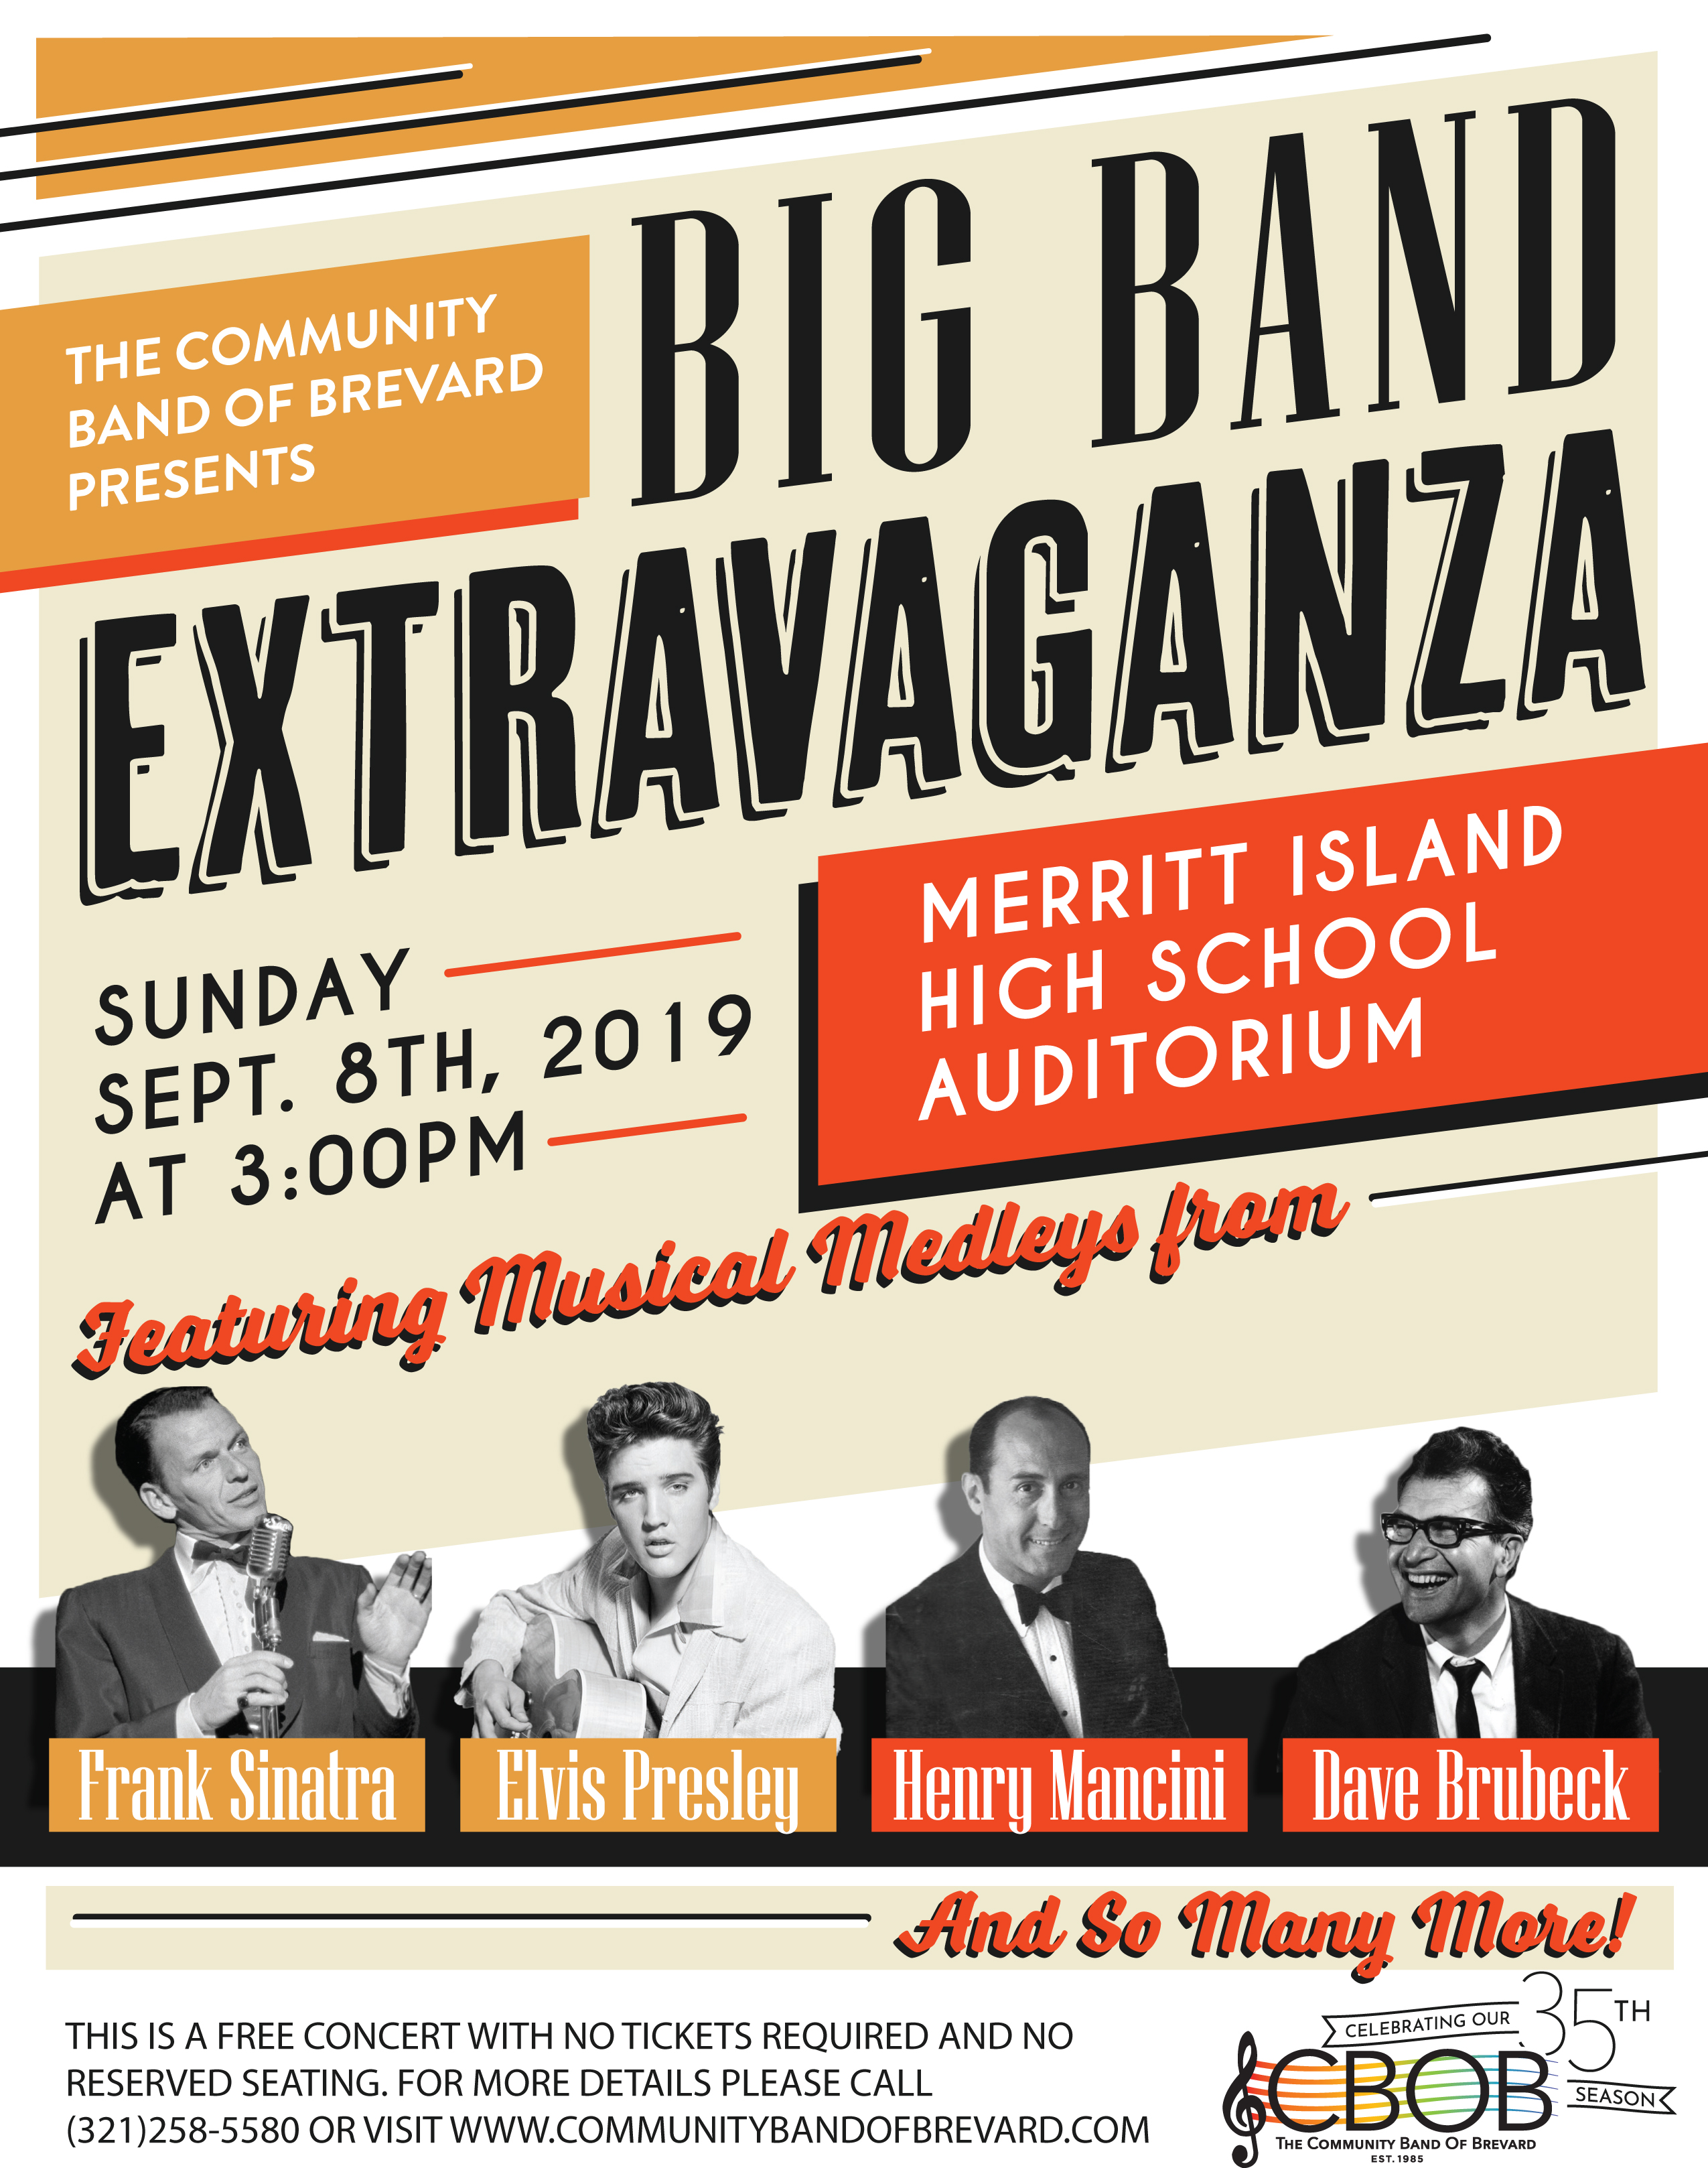 Big Band Extravaganza presented by The Community Band of Brevard